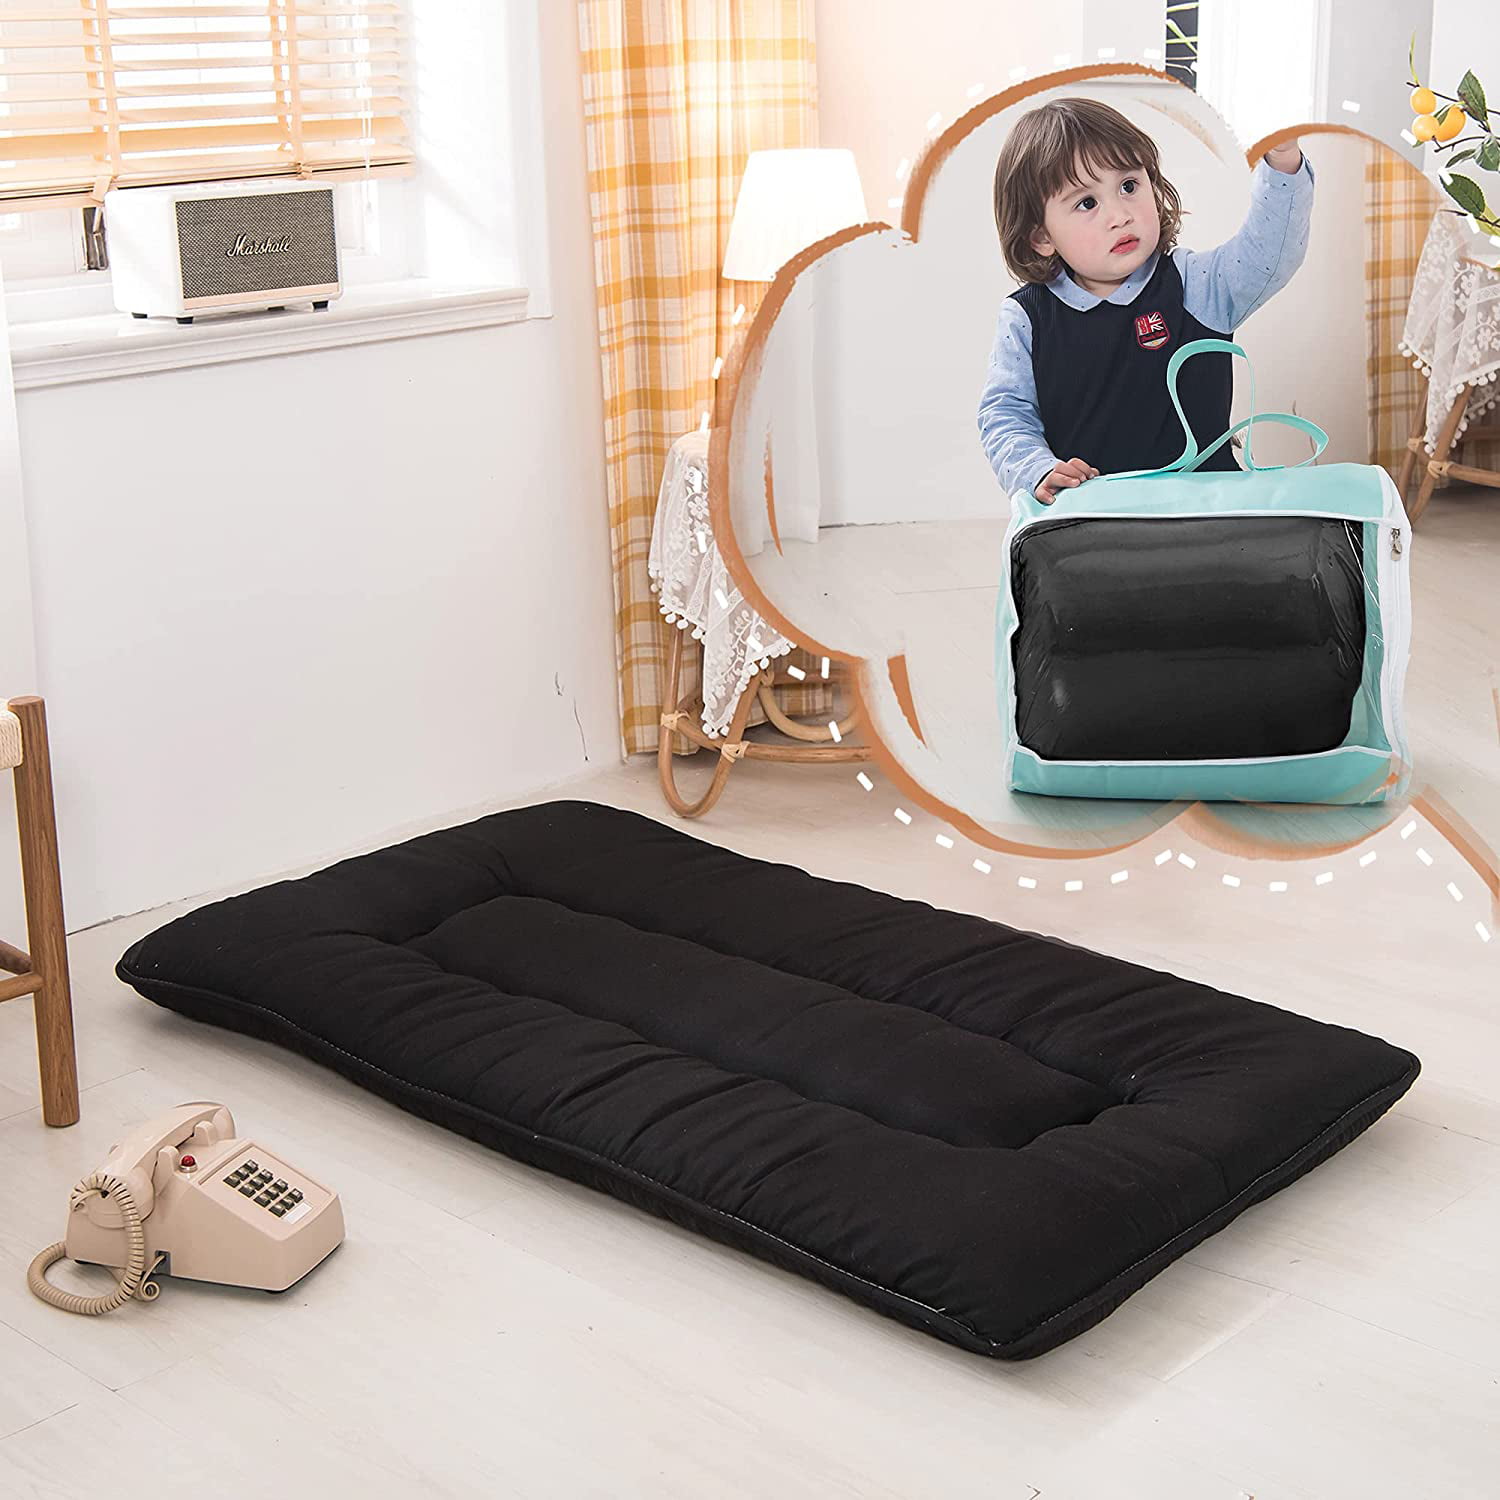 Mattress for Toddler YOSHOOT Portable Toddler Travel Bed Kids Memory Foam Floor Mattress Bed Foldable with Mattress Cover and Carry Storage Bag Portable Travel Mattress Camp Mattress Tatami Mat 